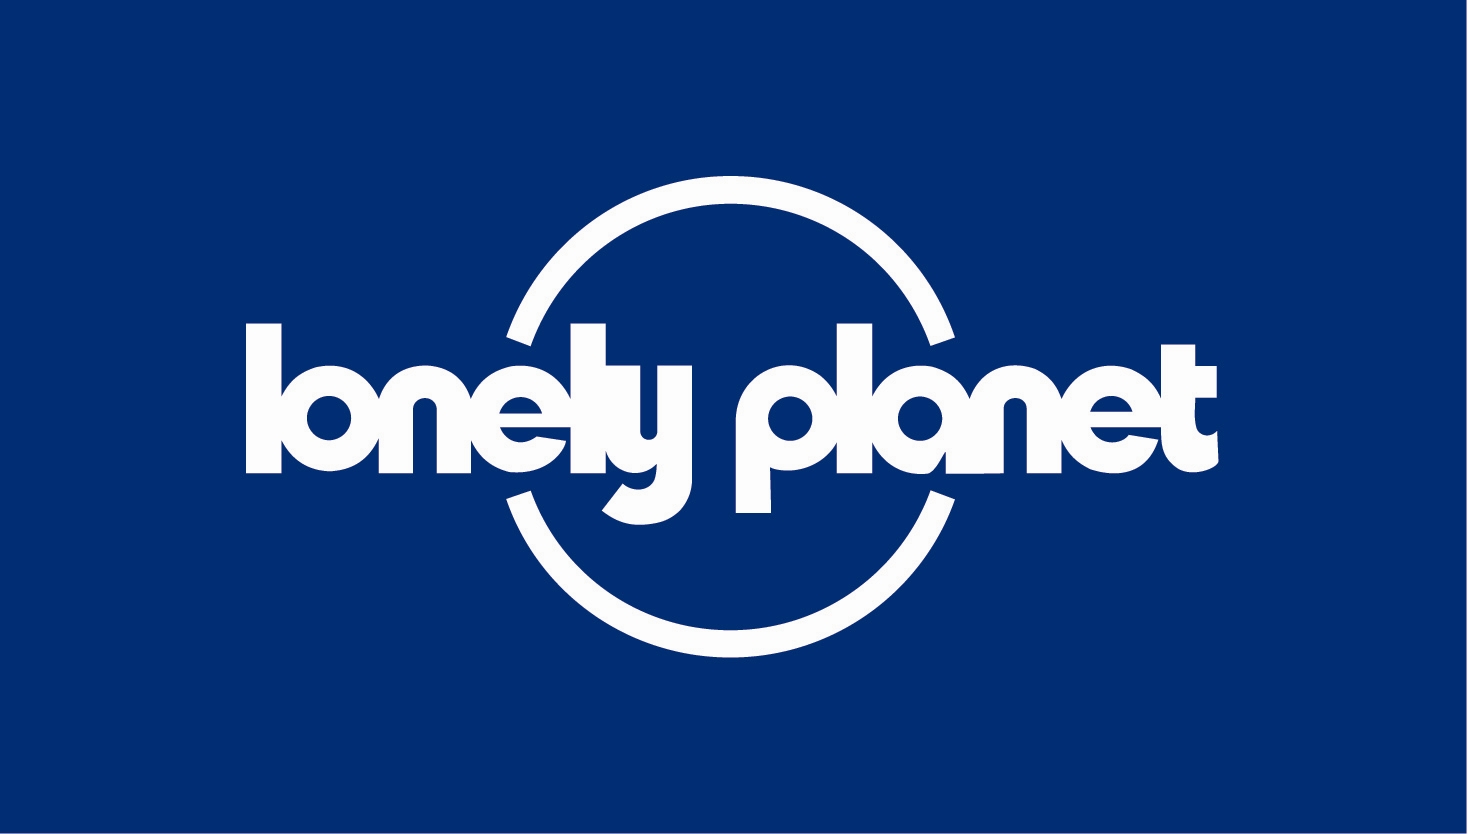 travel guide - Lonely Planet  